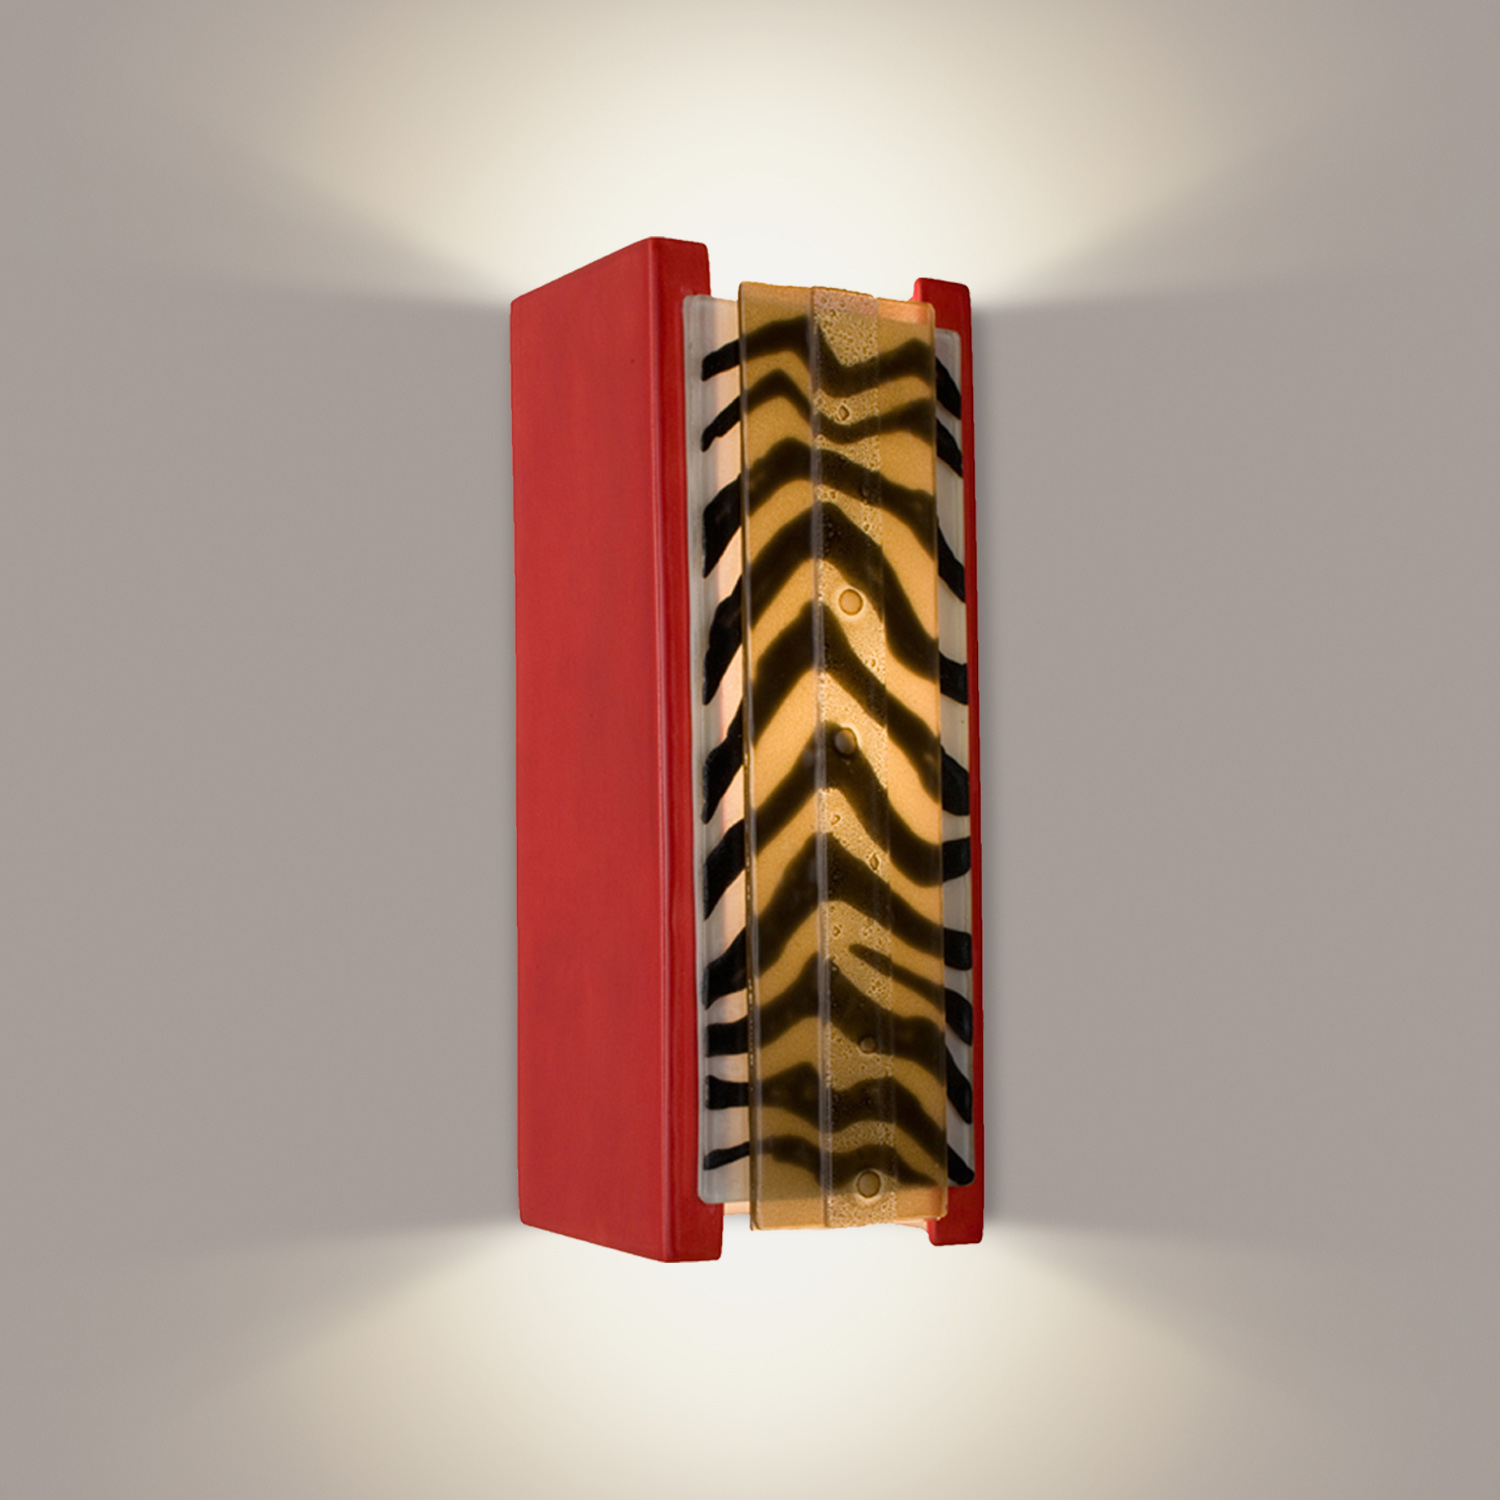 A19 RE117-MR-ZCM-WET reFusion Safari Wall Sconce Matador Red and Zebra Caramel (Outdoor Sheltered Socket for Wet Locations (Bulb not included))